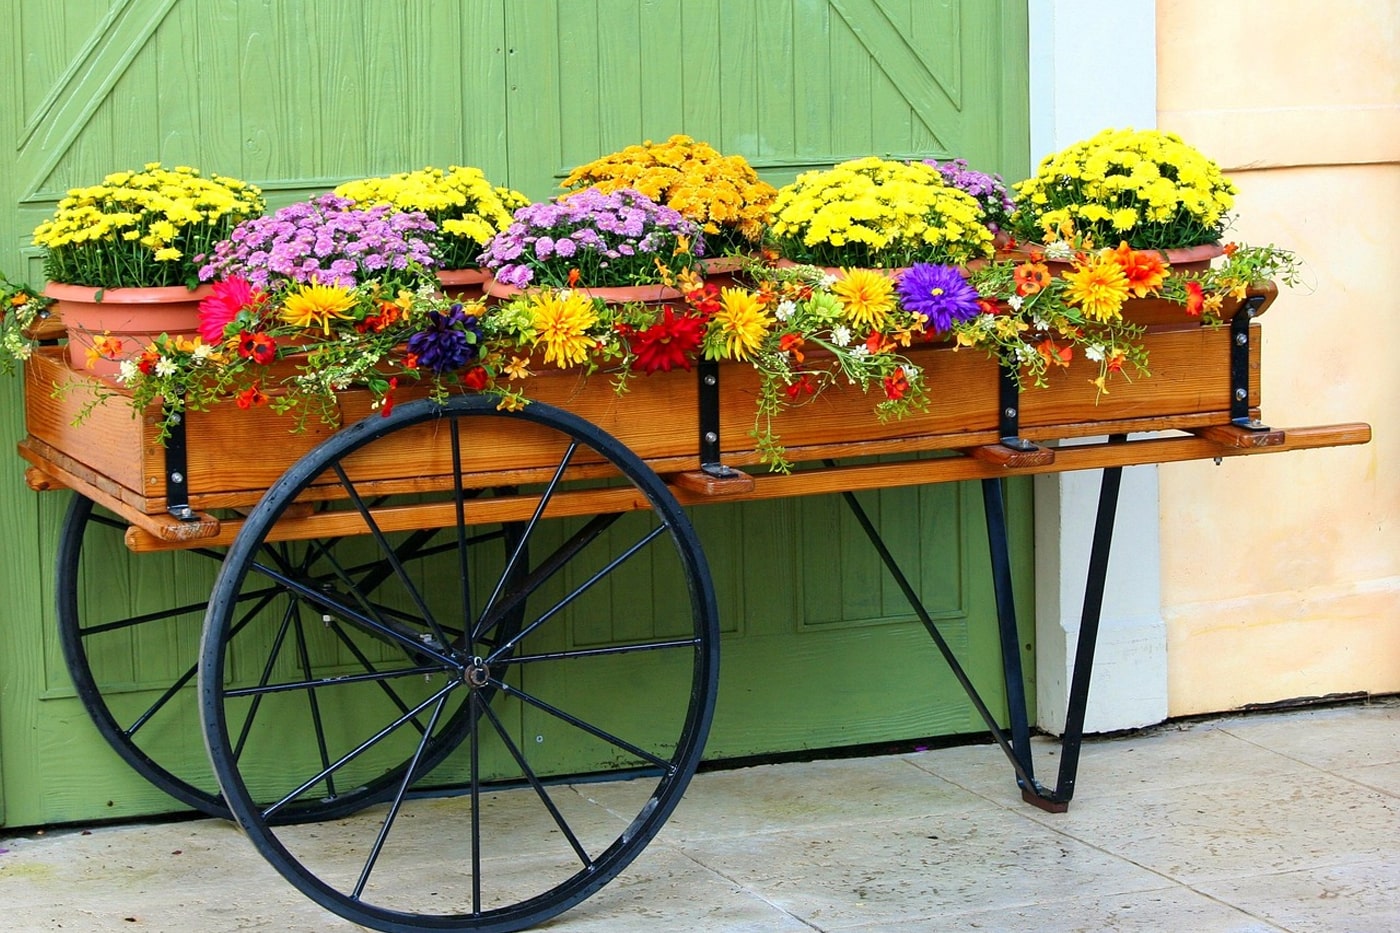 potted plants on raised beds with wheels